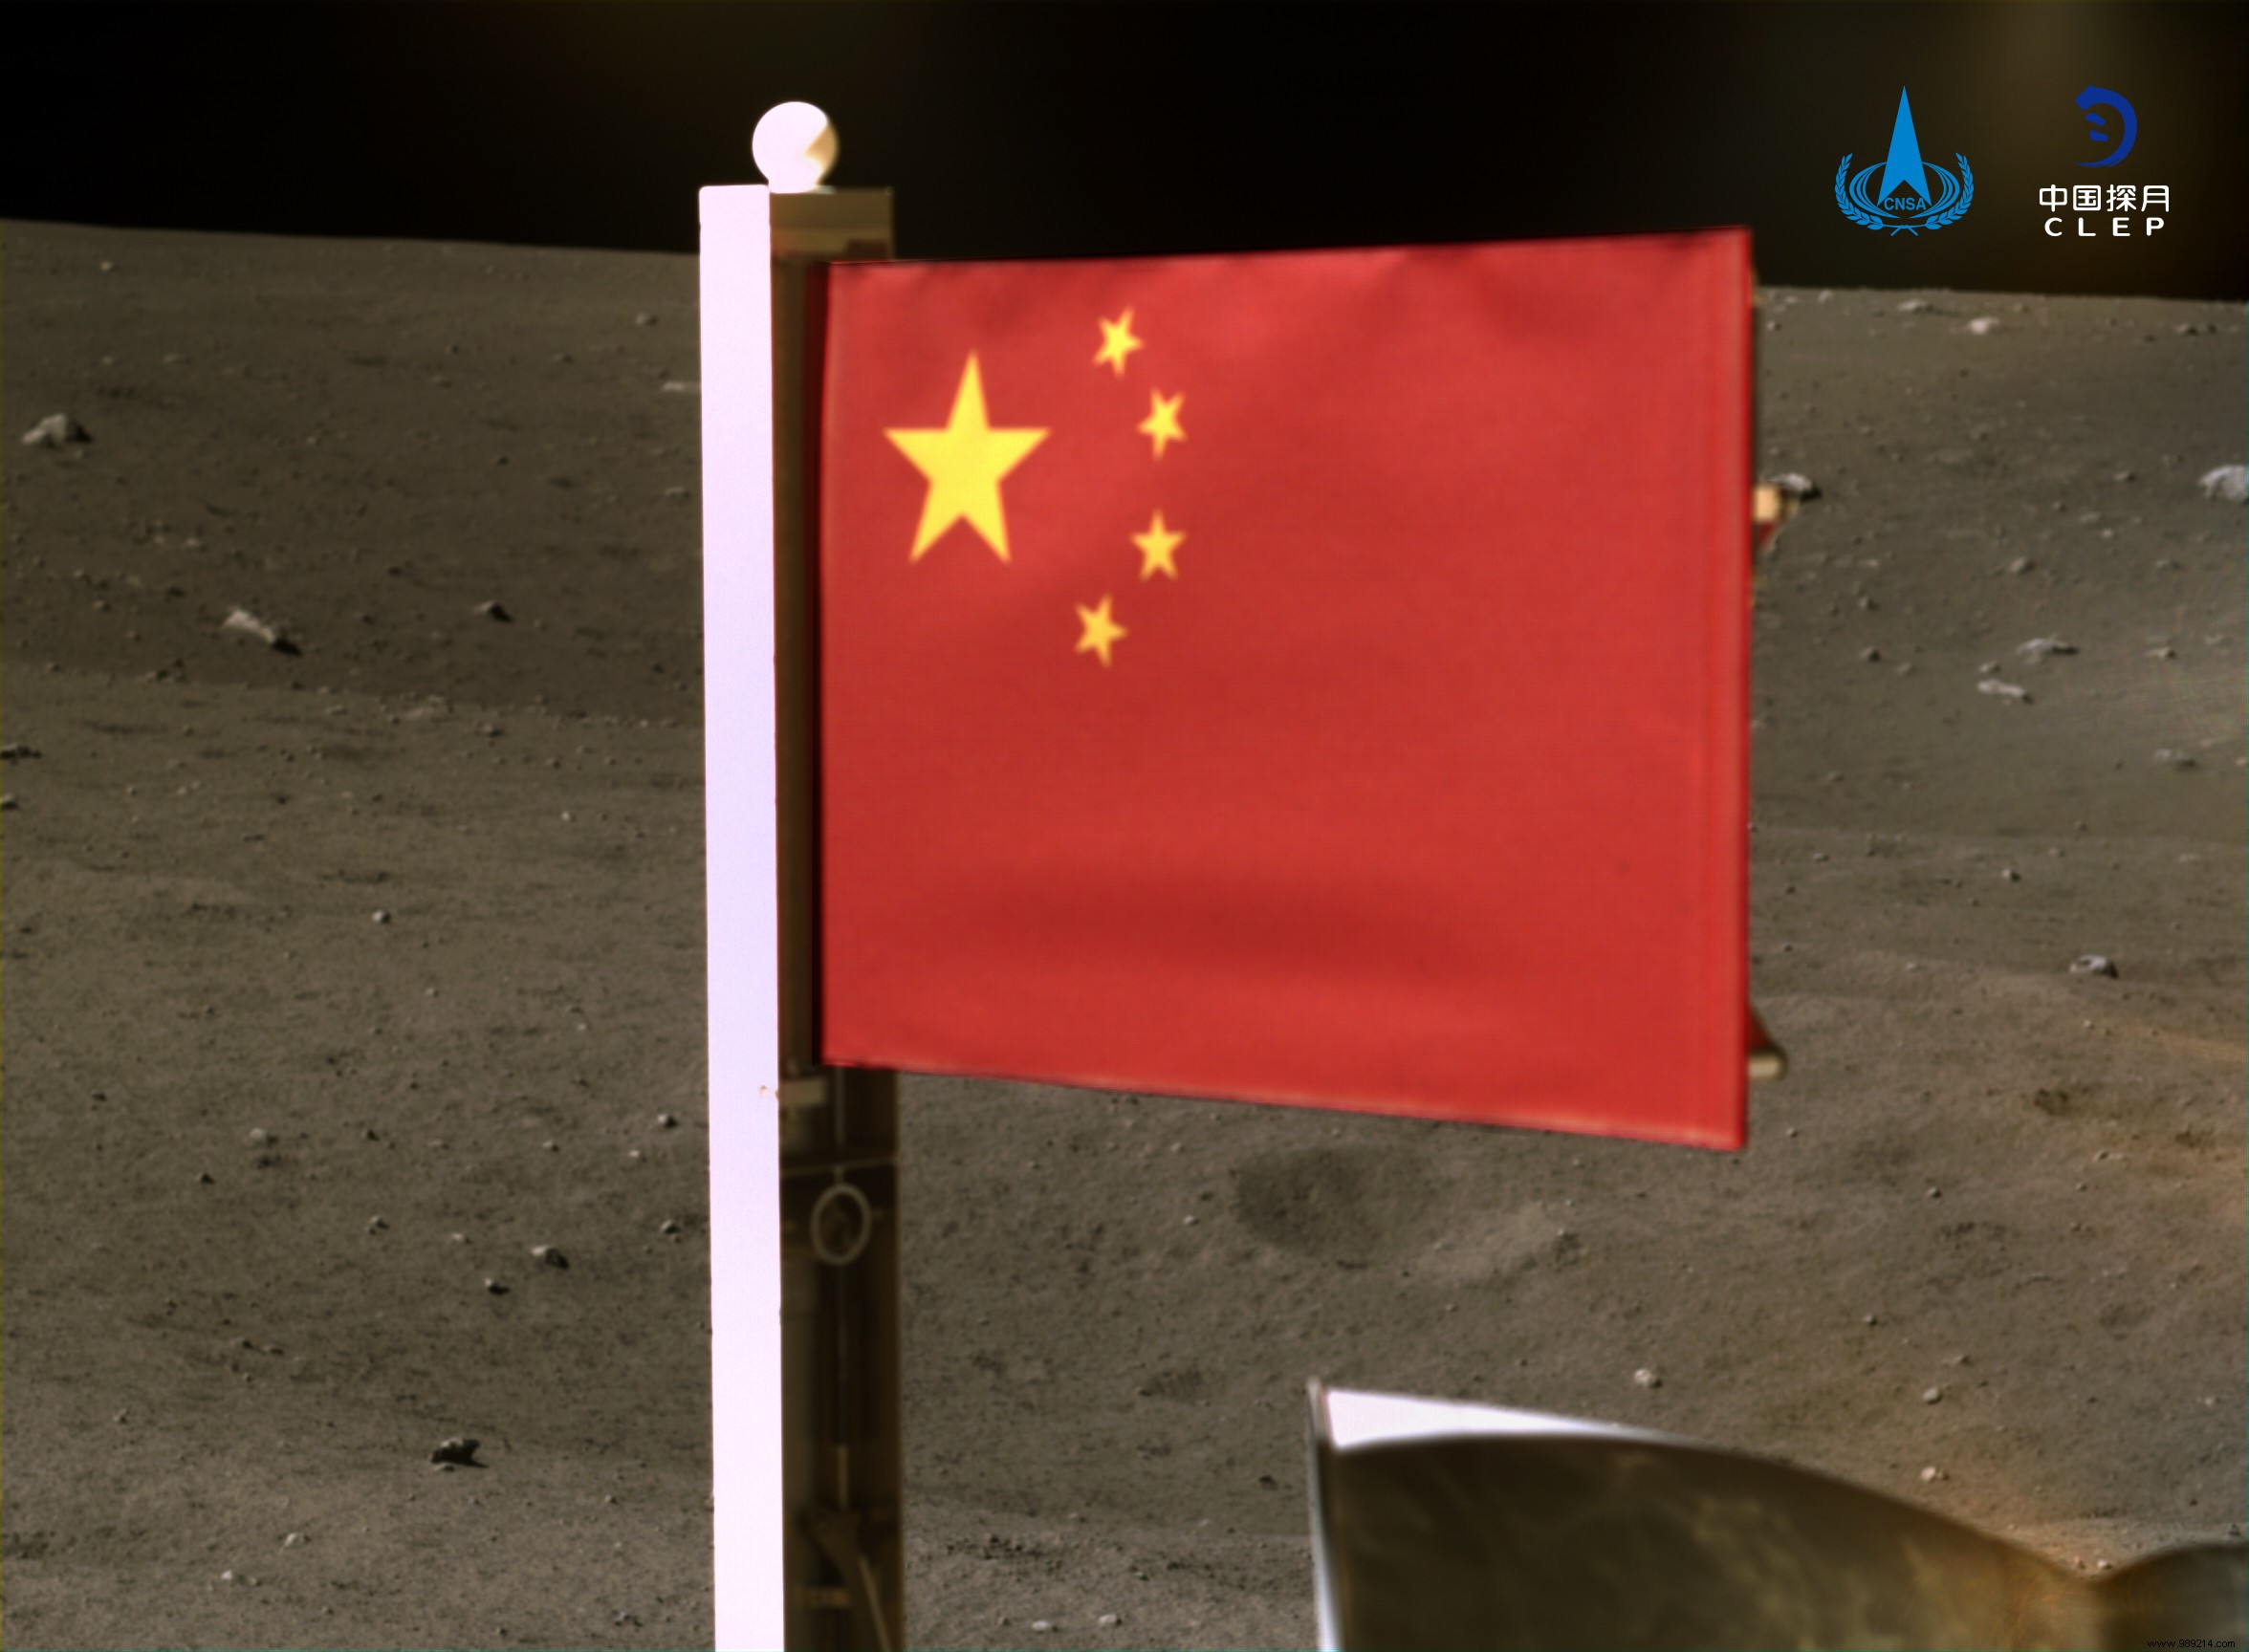 China (also) flaunts its flag on the moon 